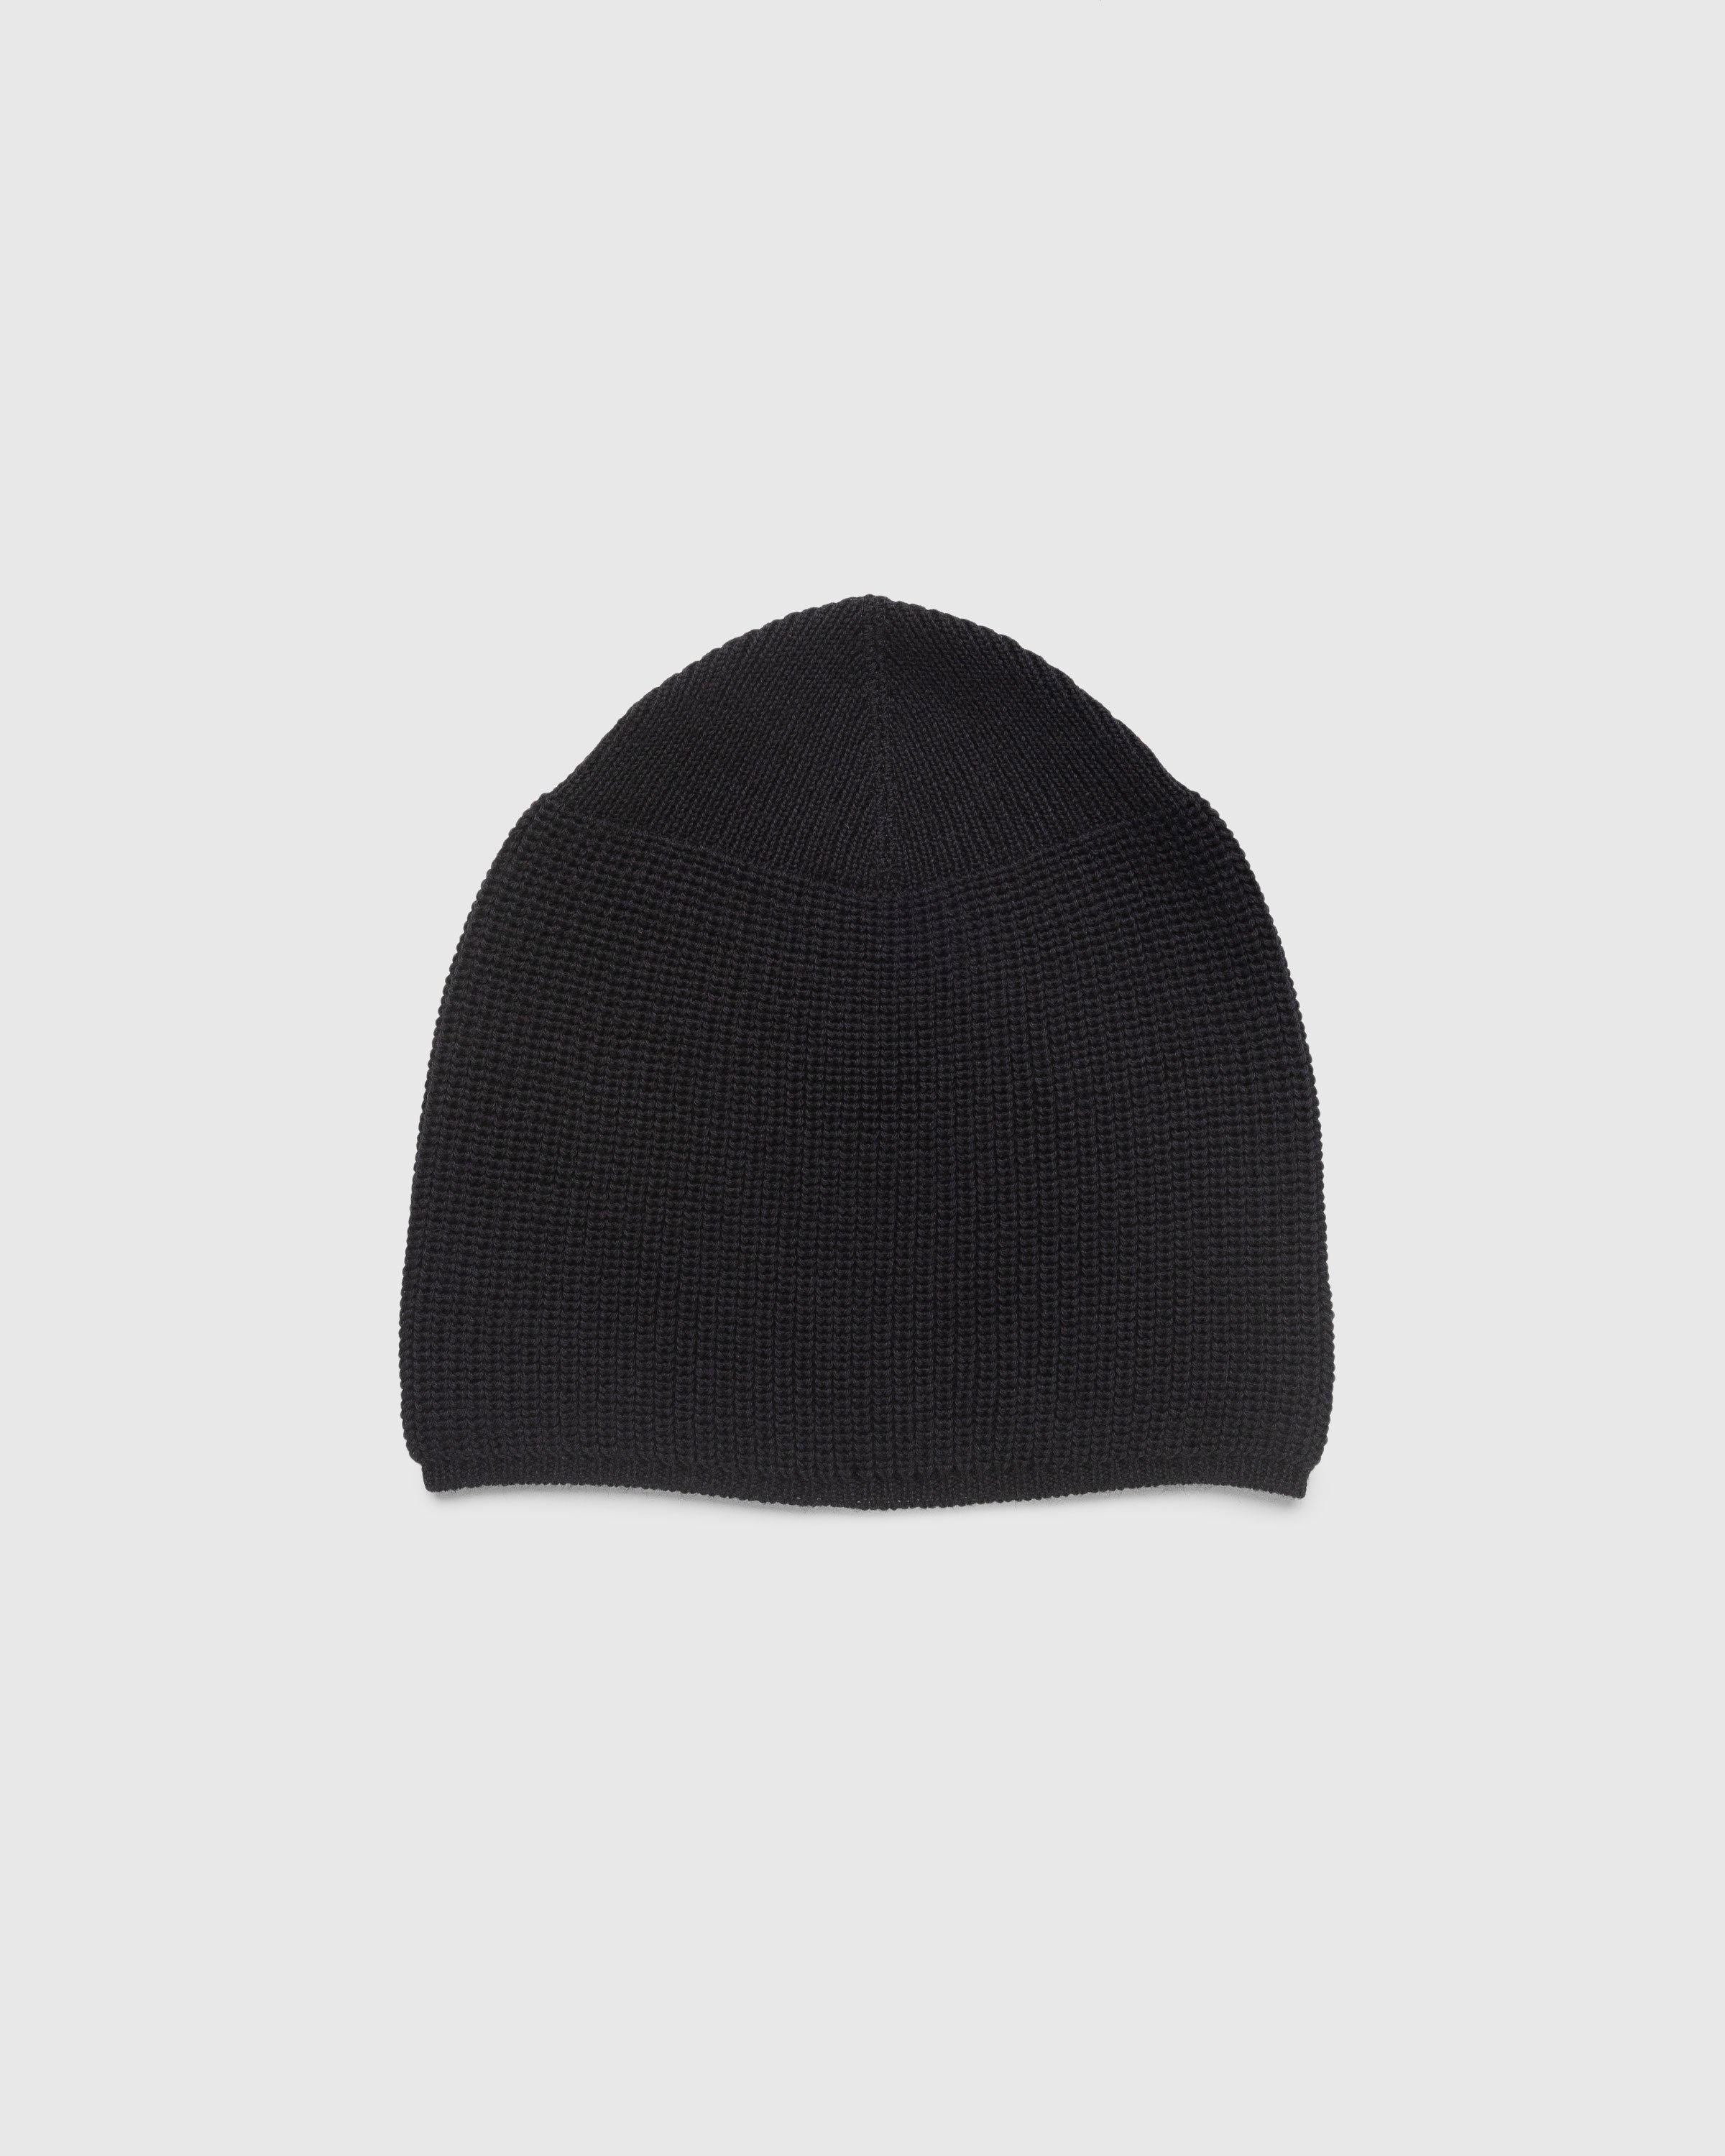 Our Legacy - KNIT HAT Black - Accessories - Black - Image 1